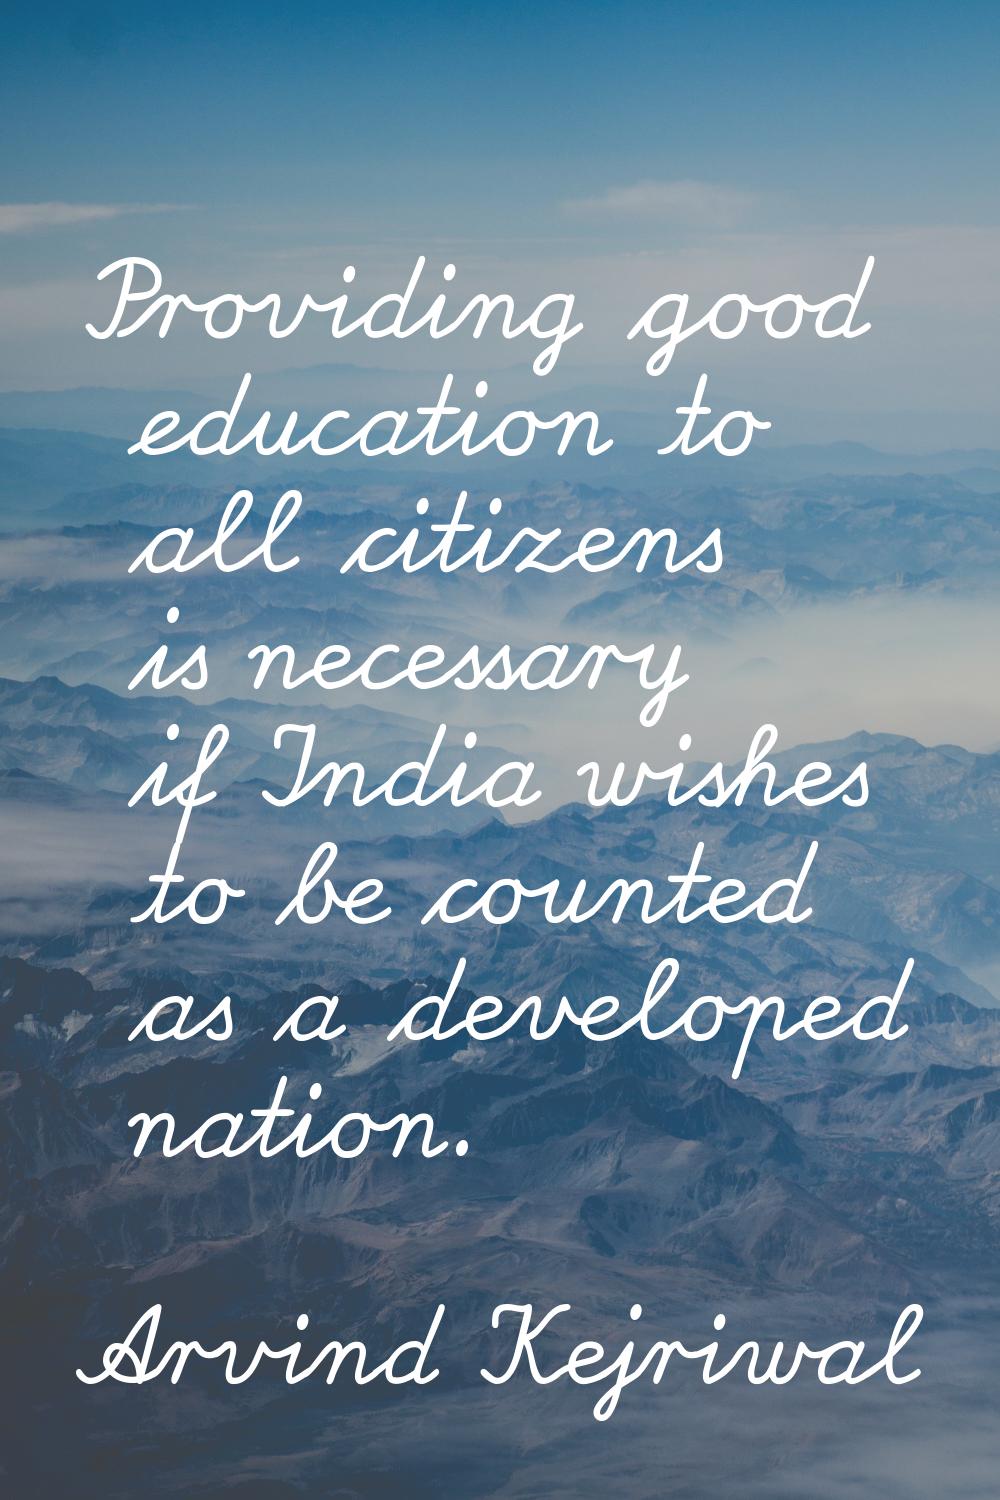 Providing good education to all citizens is necessary if India wishes to be counted as a developed 